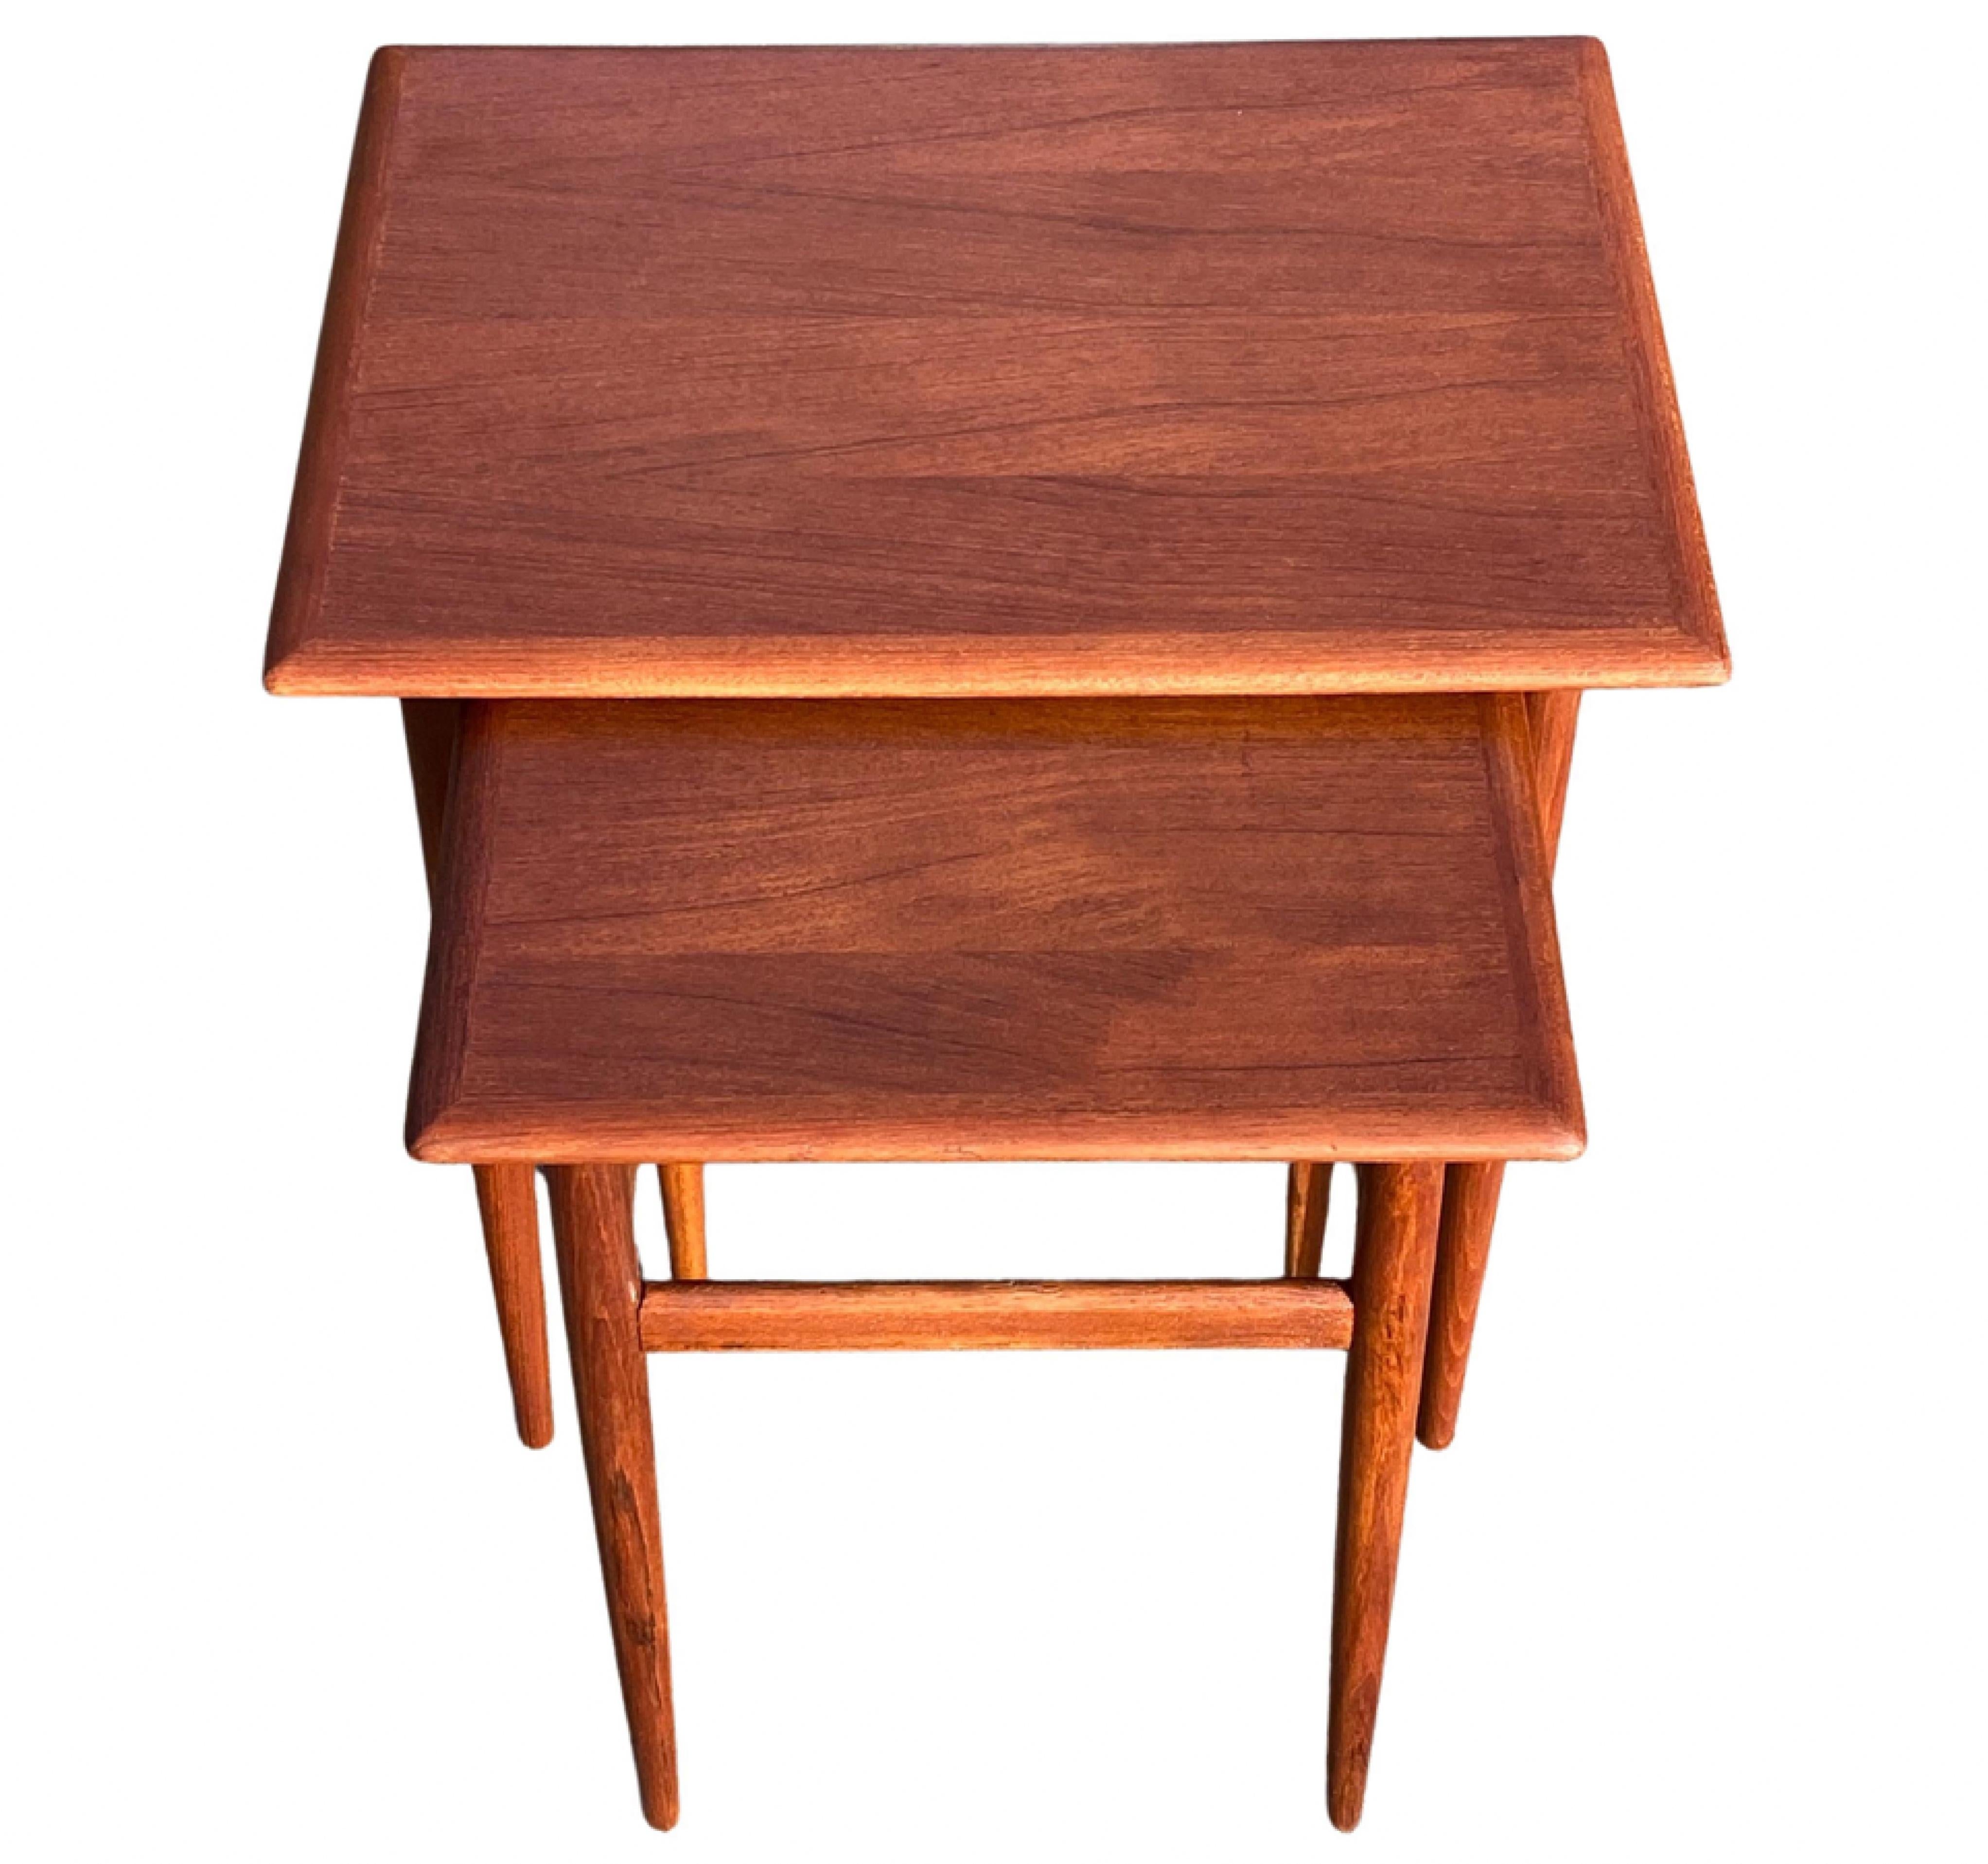 Elegant set of nesting tables by Danish furniture manufacturer. Designed and produced in 1960s. Solid teak. Measures are the largest of the tables.

The tables are inspired and resembles nesting tables designed by Hans J. Wegner and Johannes